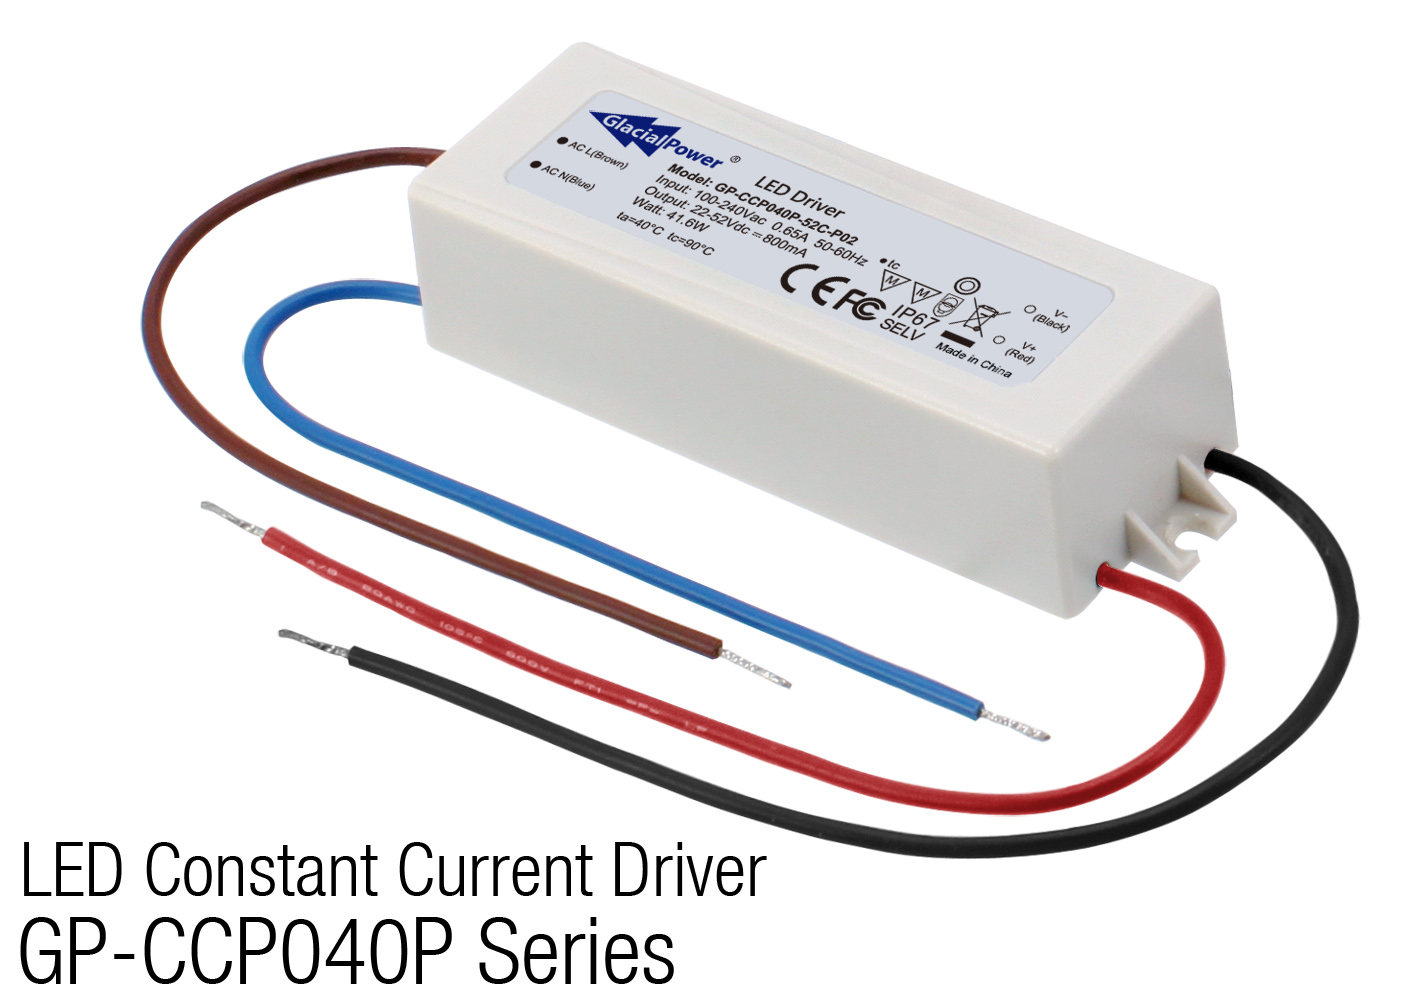 GlacialPower Launches GP-CCP040P LED Constant Current Driver Series which focus on the 36V CoB market